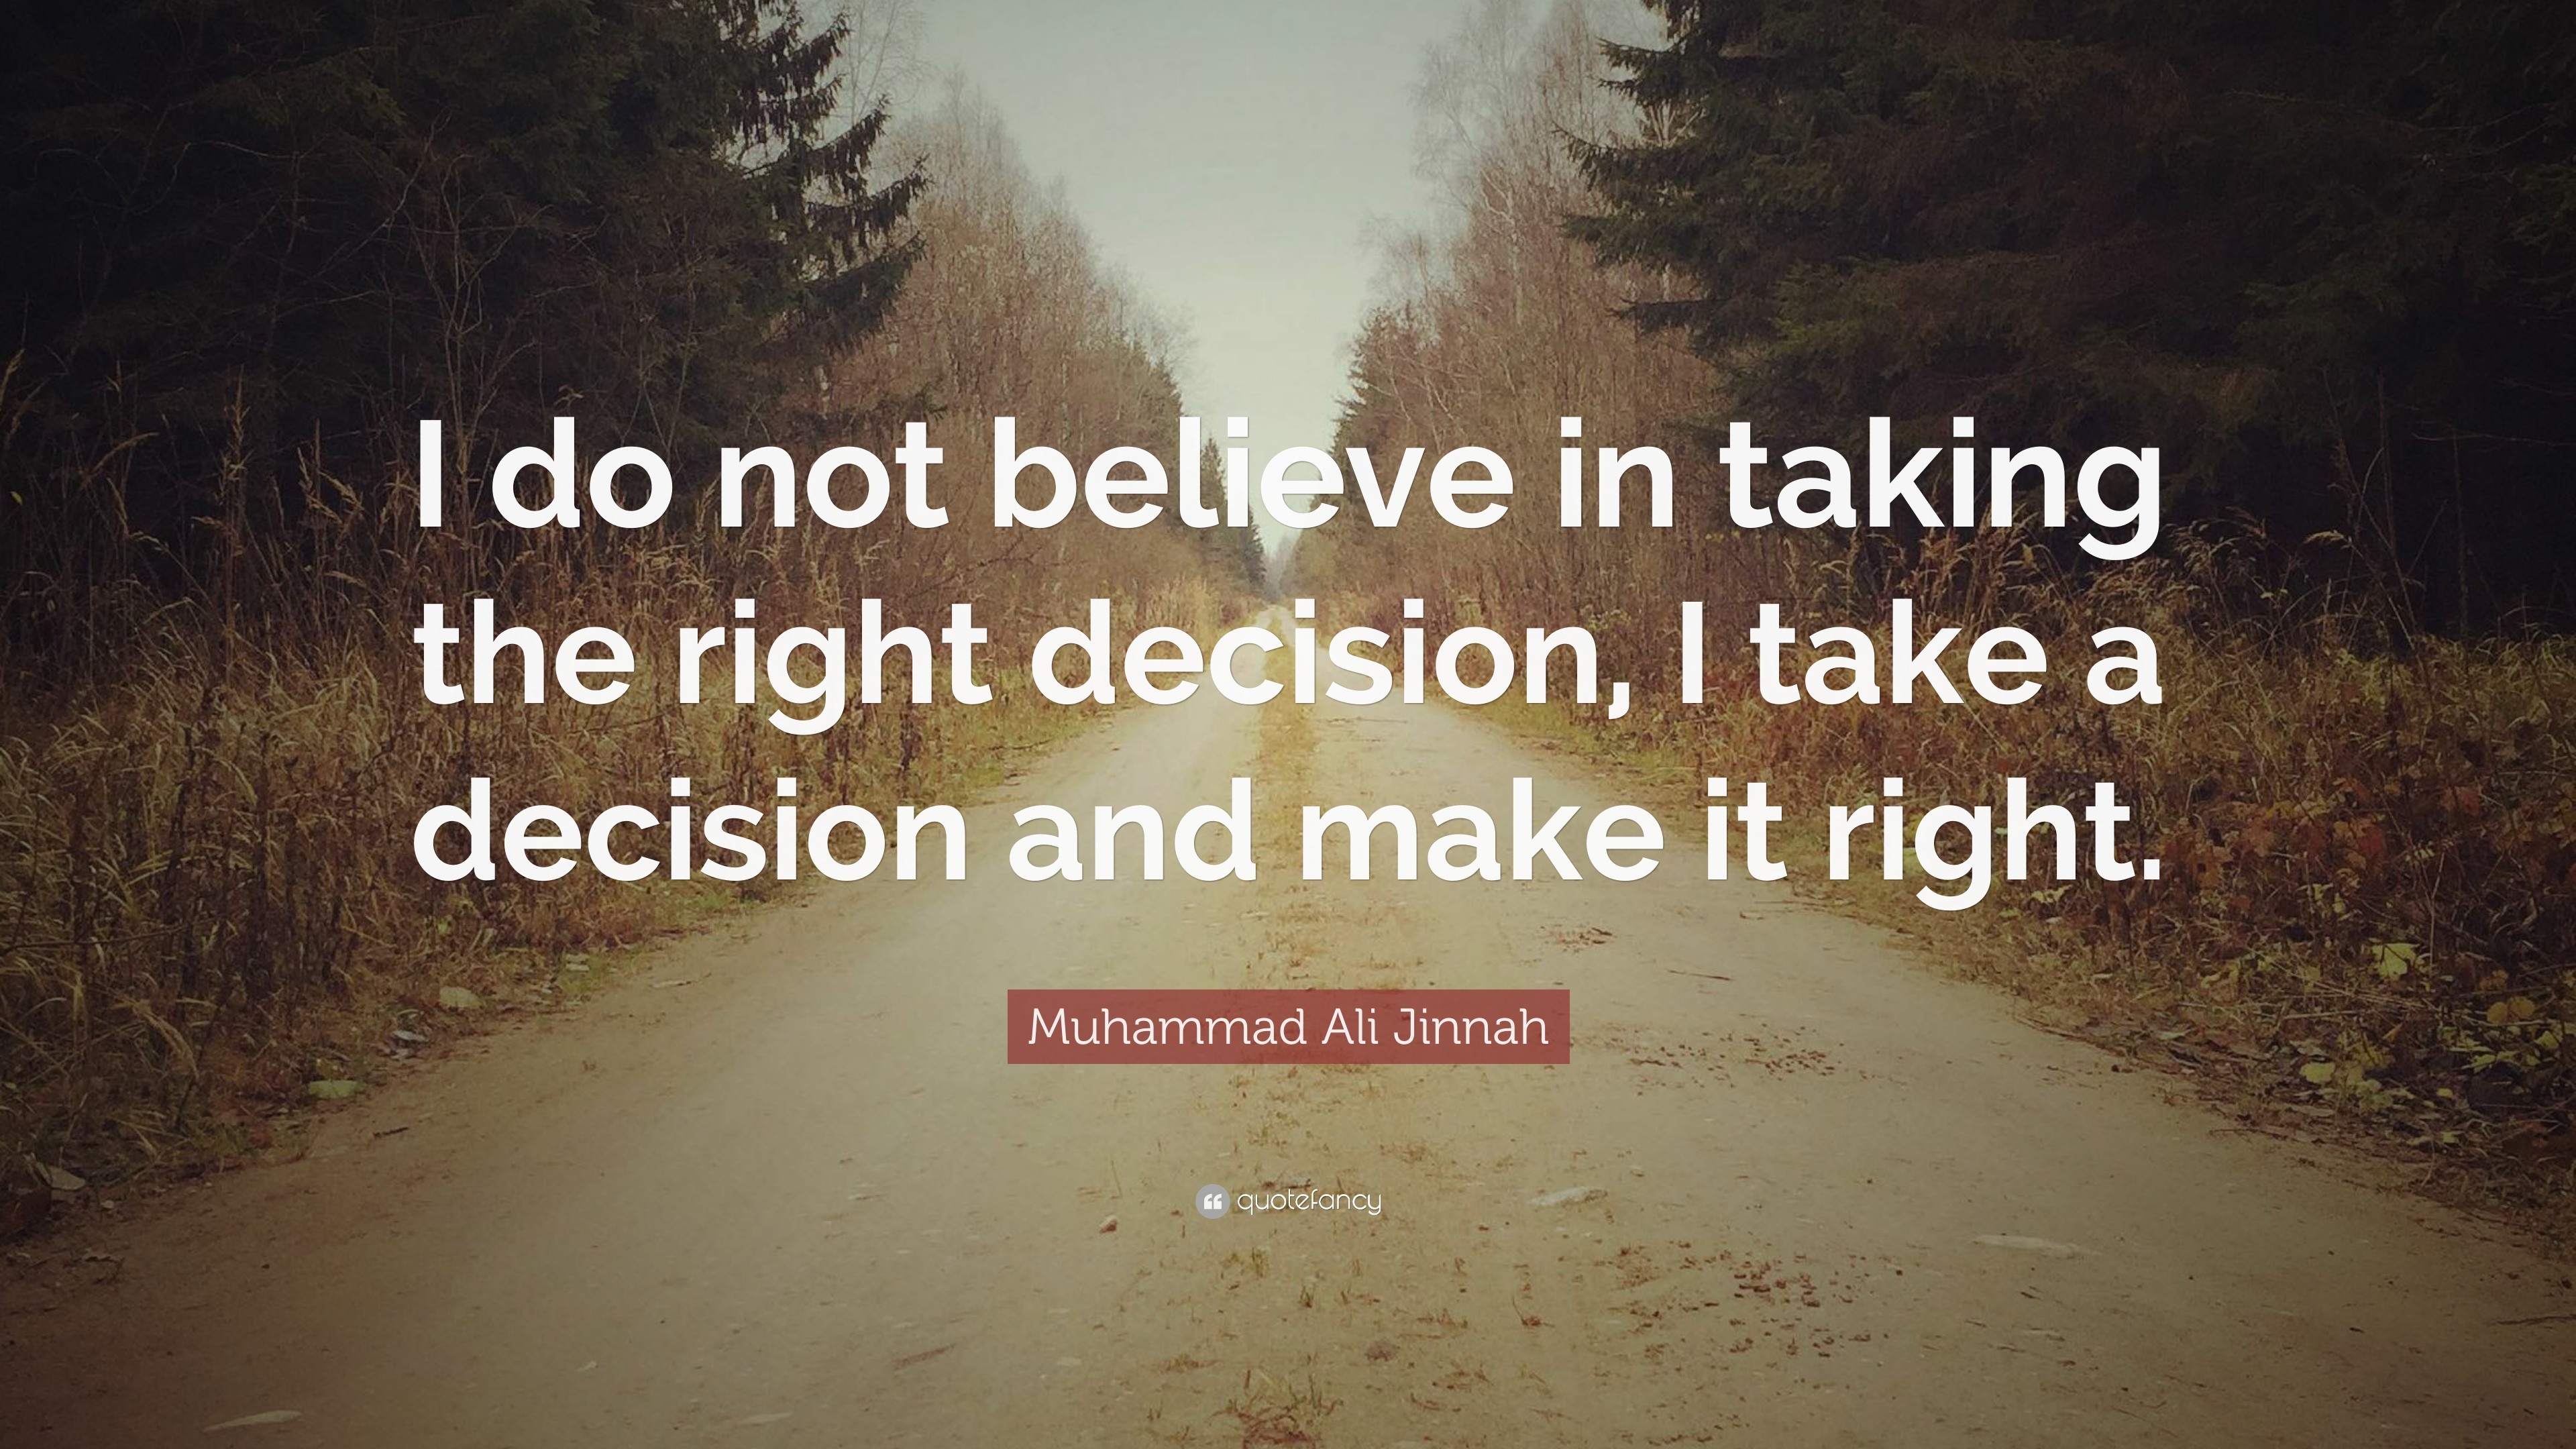 3840x2160 Muhammad Ali Jinnah Quote: “I do not believe in taking the right decision,